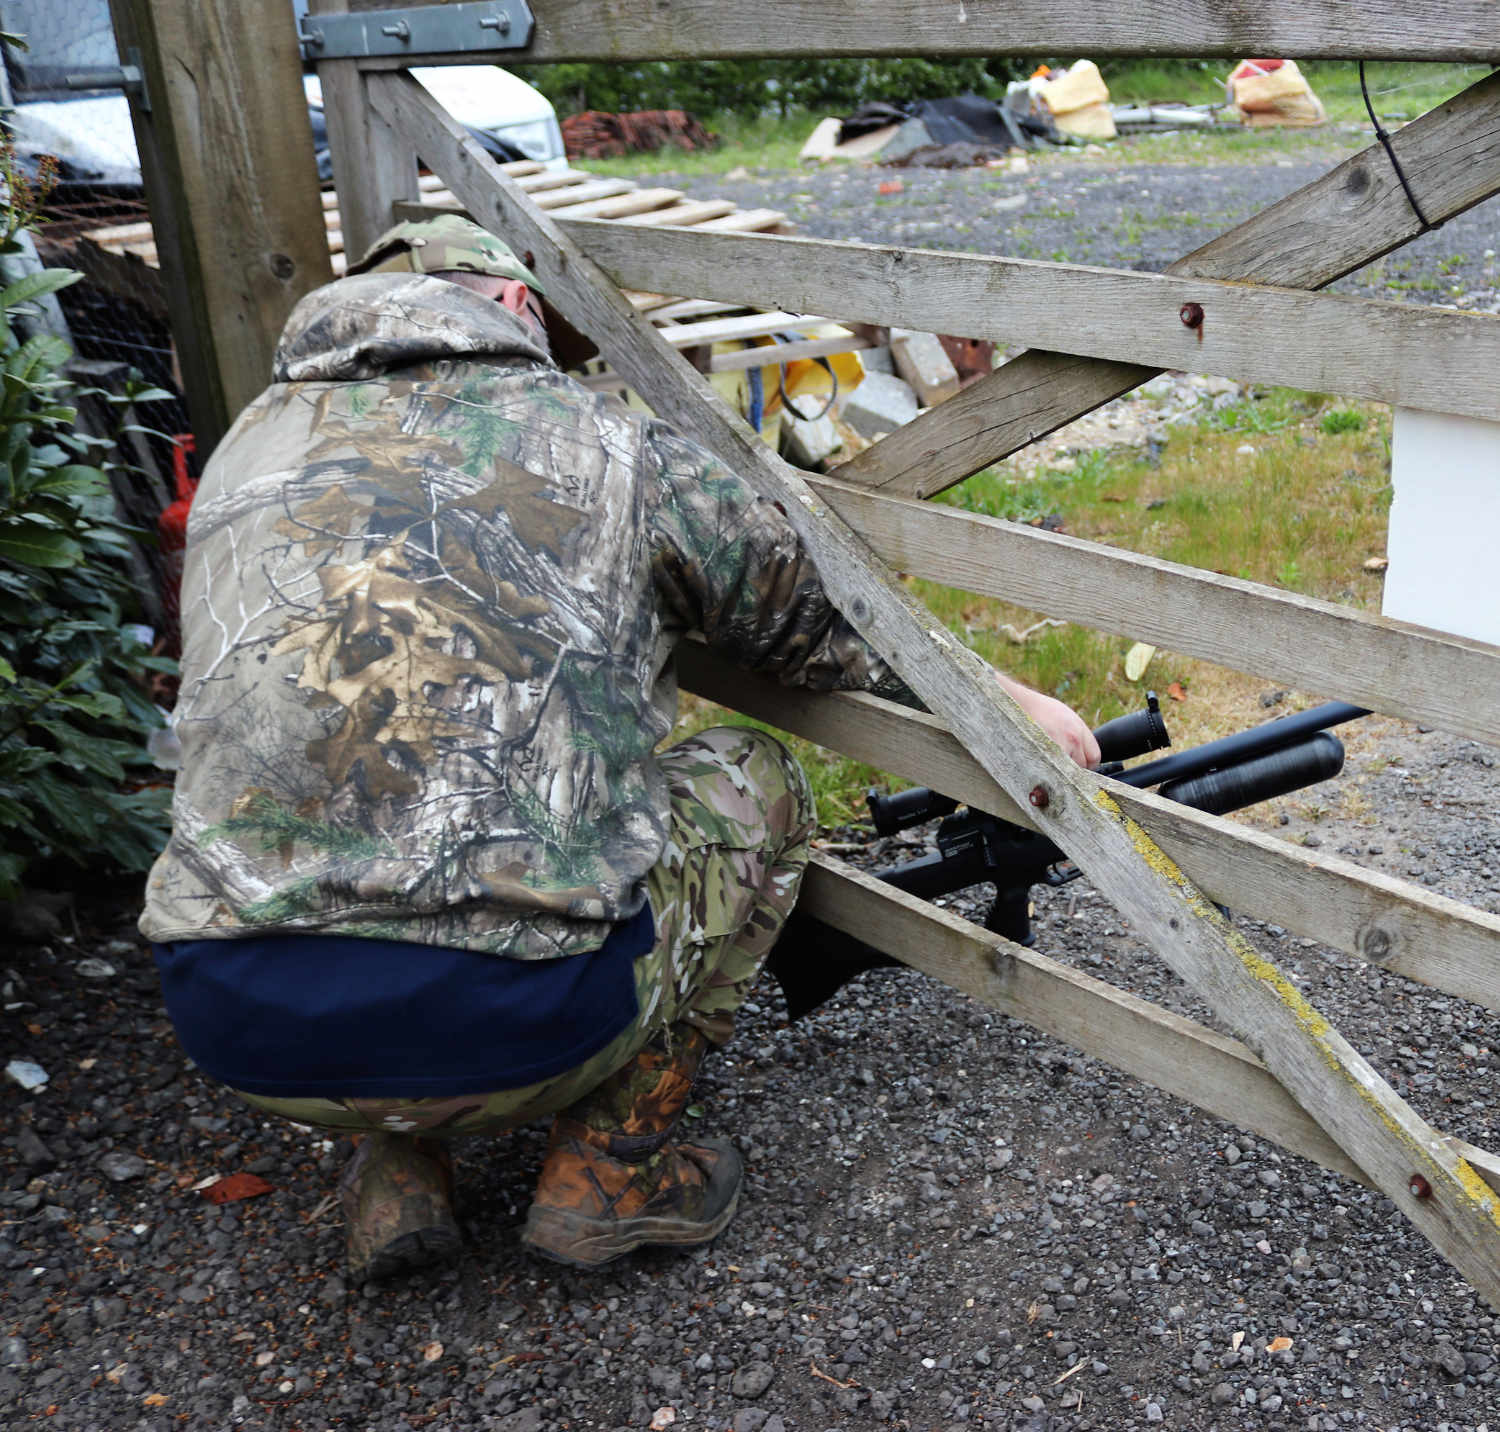 Negotiating obstacles with an airgun